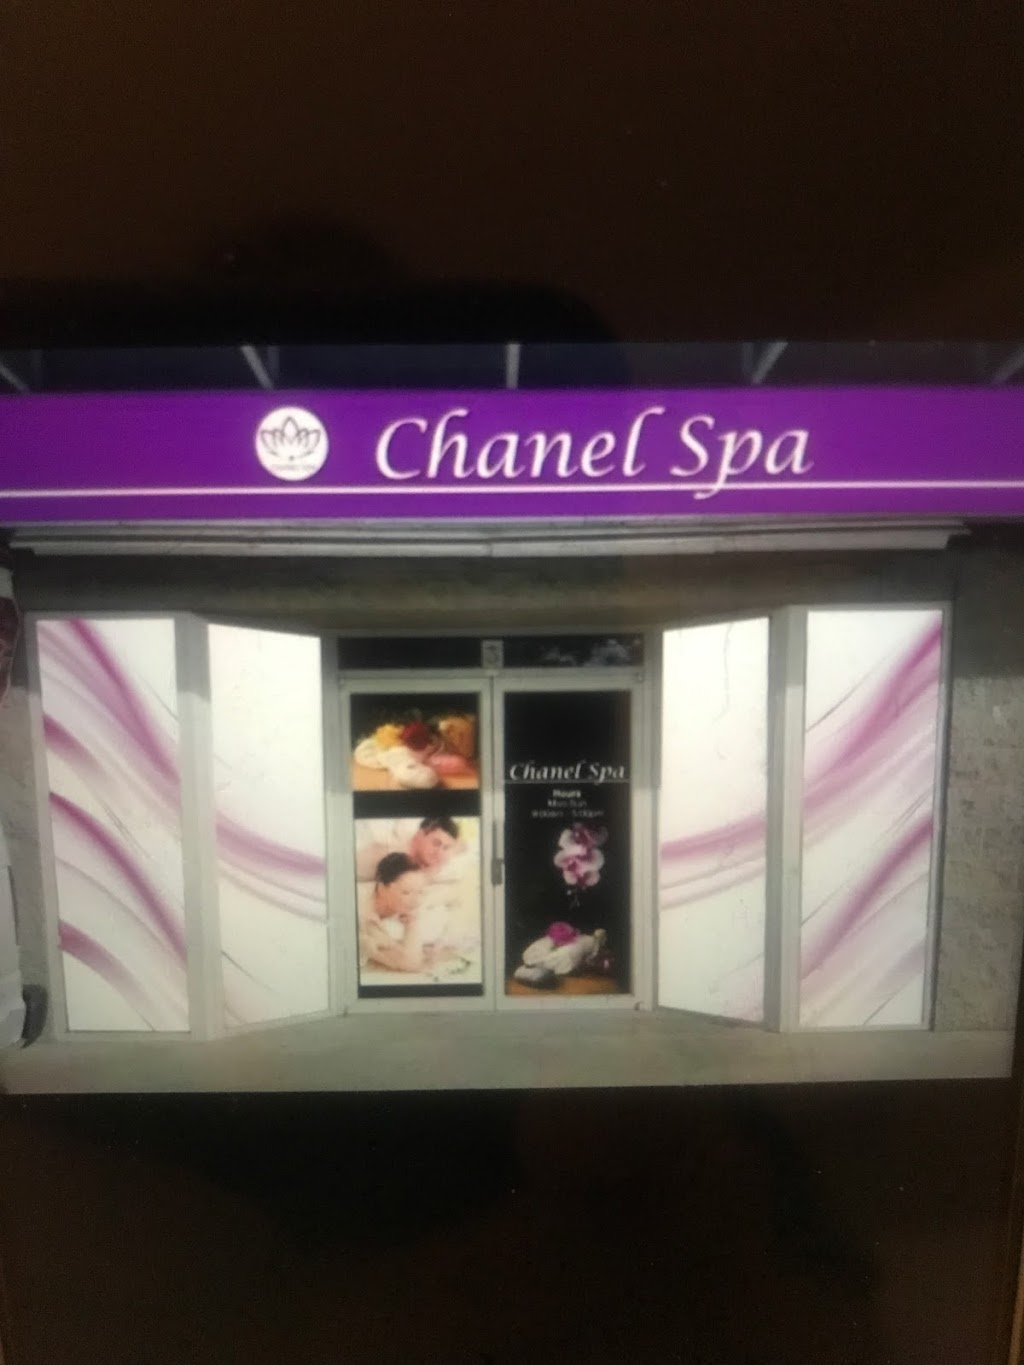 Chanel Relaxation Massage | spa | 2664 Gladys Ave, Abbotsford, BC V2S 3X8, Canada | 6047466777 OR +1 604-746-6777